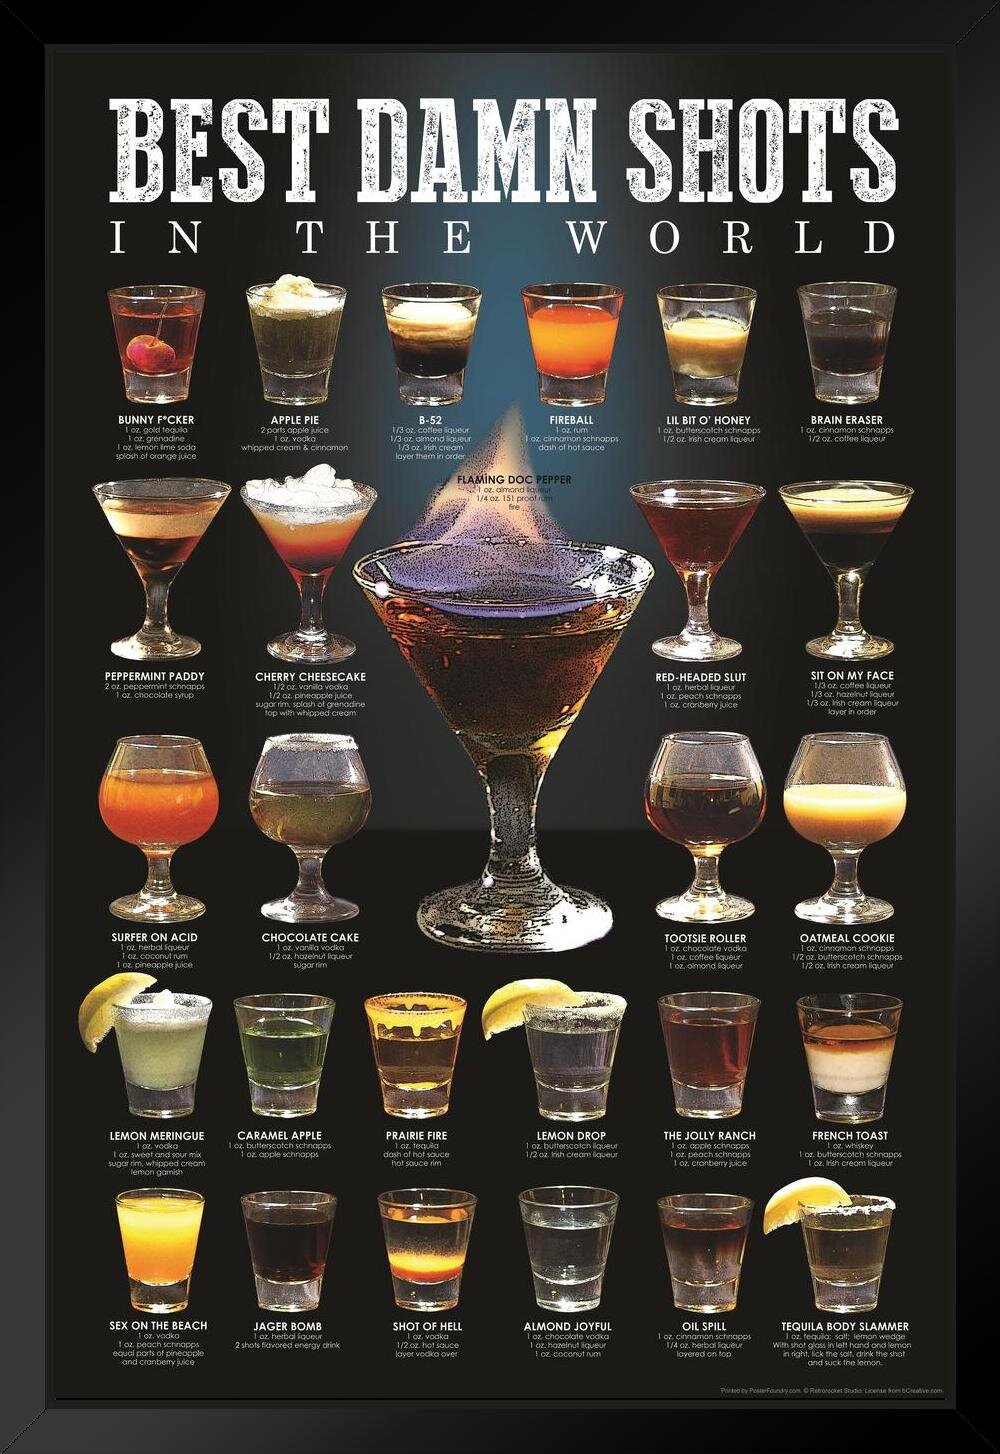 Trinx Types Of Beer Glasses And Styles Of Beer Reference Guide Chart Home  Bar Decor Pub Decor IPA Beer Mug Pint Glass Beer Sign Porter Stout Ale Beer  Stein Brewing Black Wood